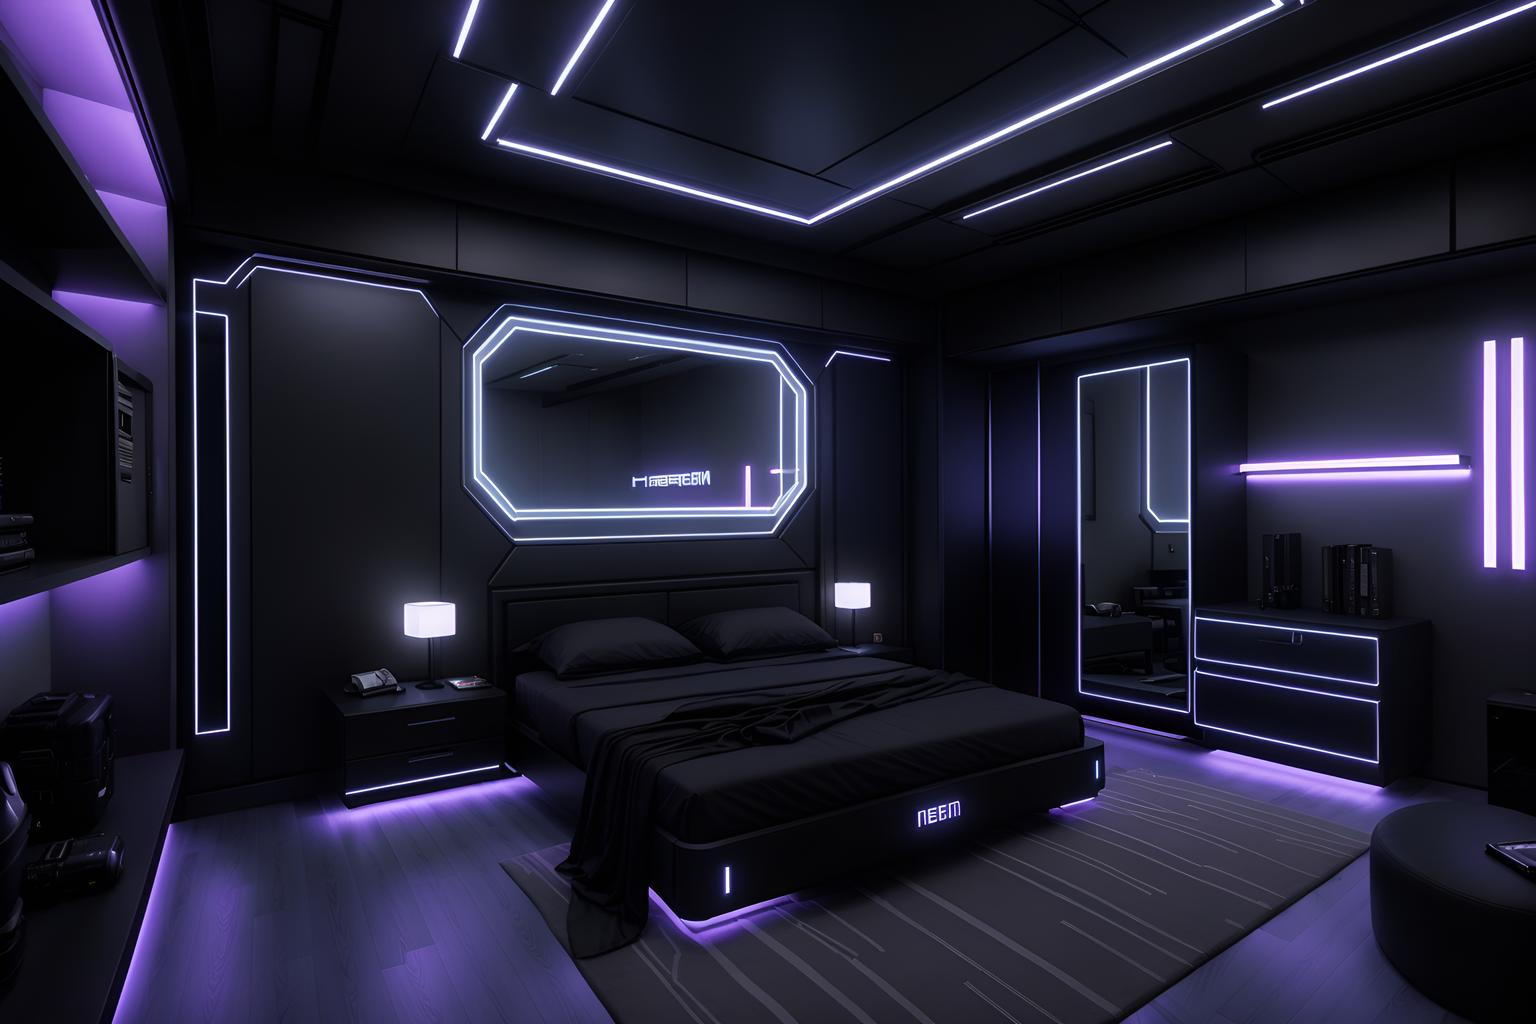 Cyberpunk-style bedroom home interior With military uniforms and gear and dark night and led lights and futuristic cybernetic city and synthetic objects and clean straight square lines and strong geometric walls and synthwave. With bed and headboard and bedside table or night stand and dresser closet and plant and storage bench or ottoman and accent chair and night light and mirror. Cinematic photo, highly detailed, cinematic lighting, ultra-detailed, ultrarealistic, photorealism, 8k. Cyberpunk interior design style